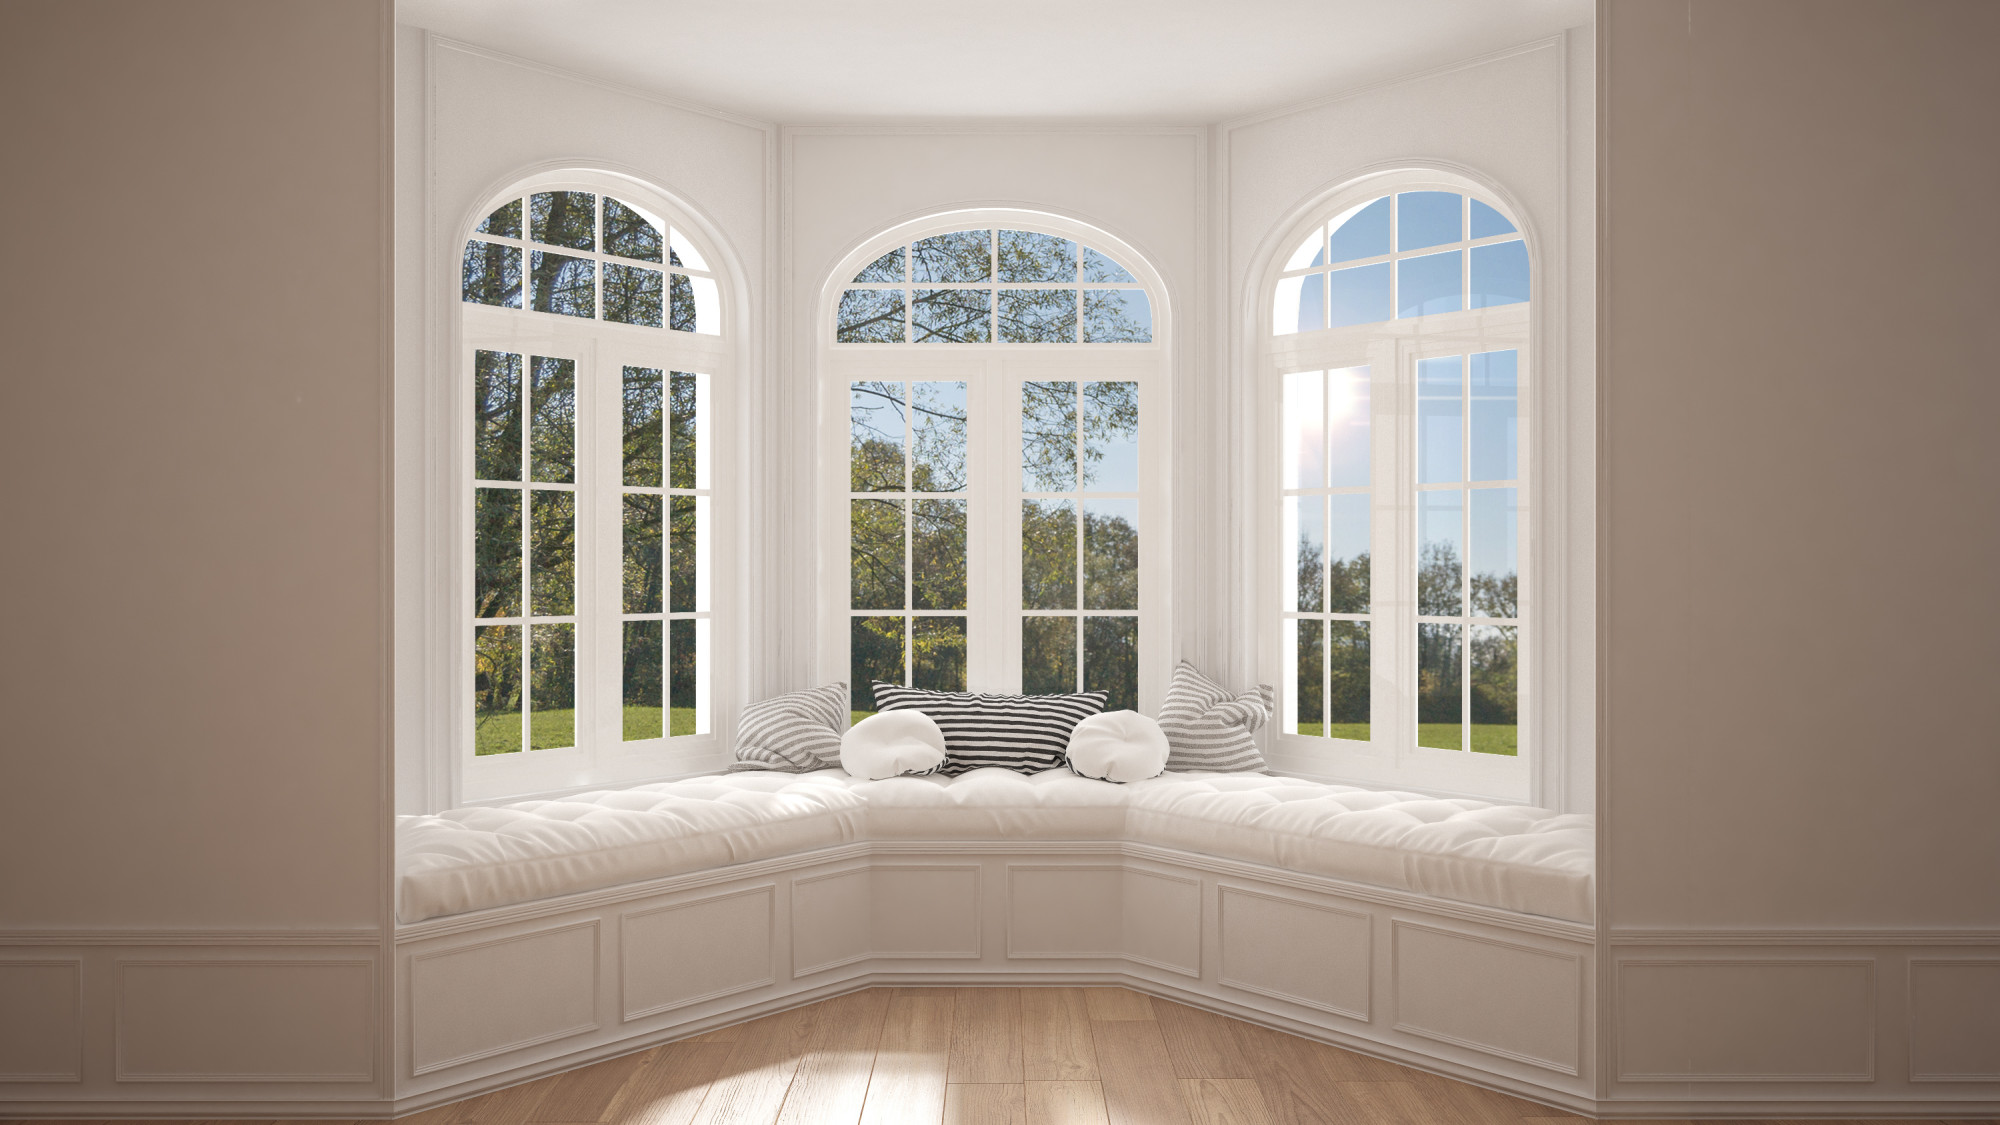 Thinking about getting new windows for your home? First, learn about the best types of windows for homes before you make your choice.